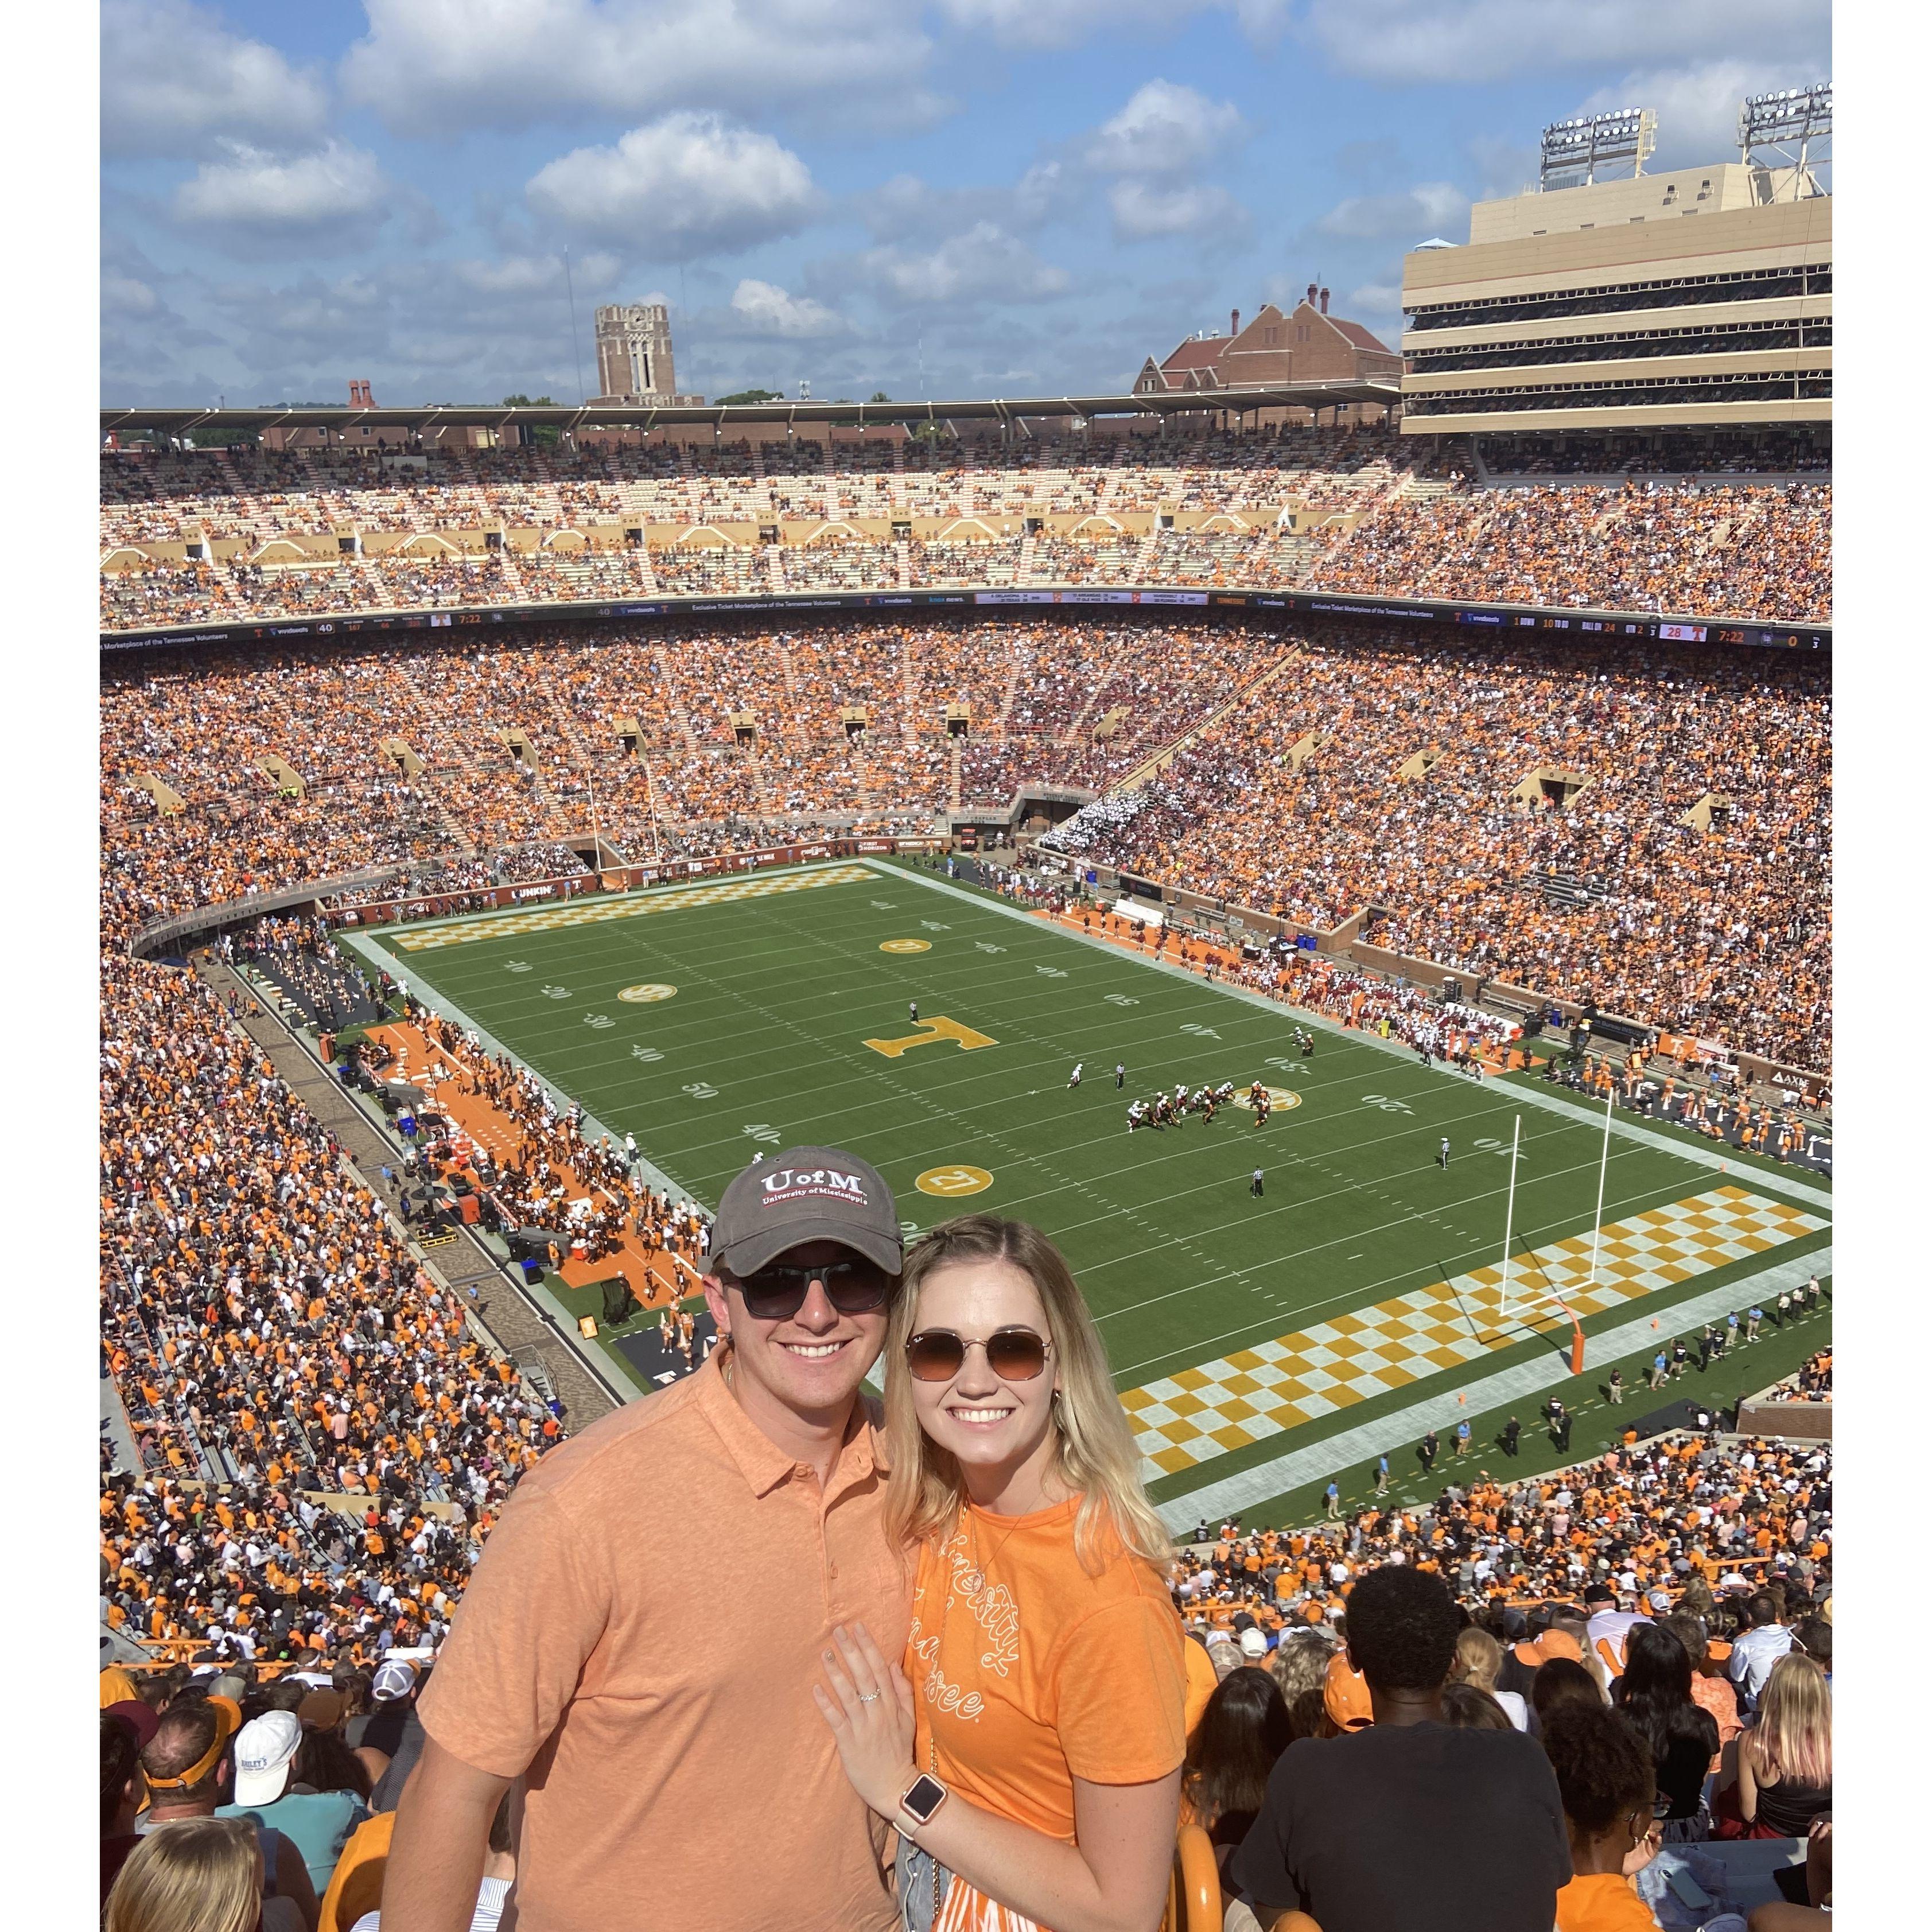 October 2021: Cheering on the vols!